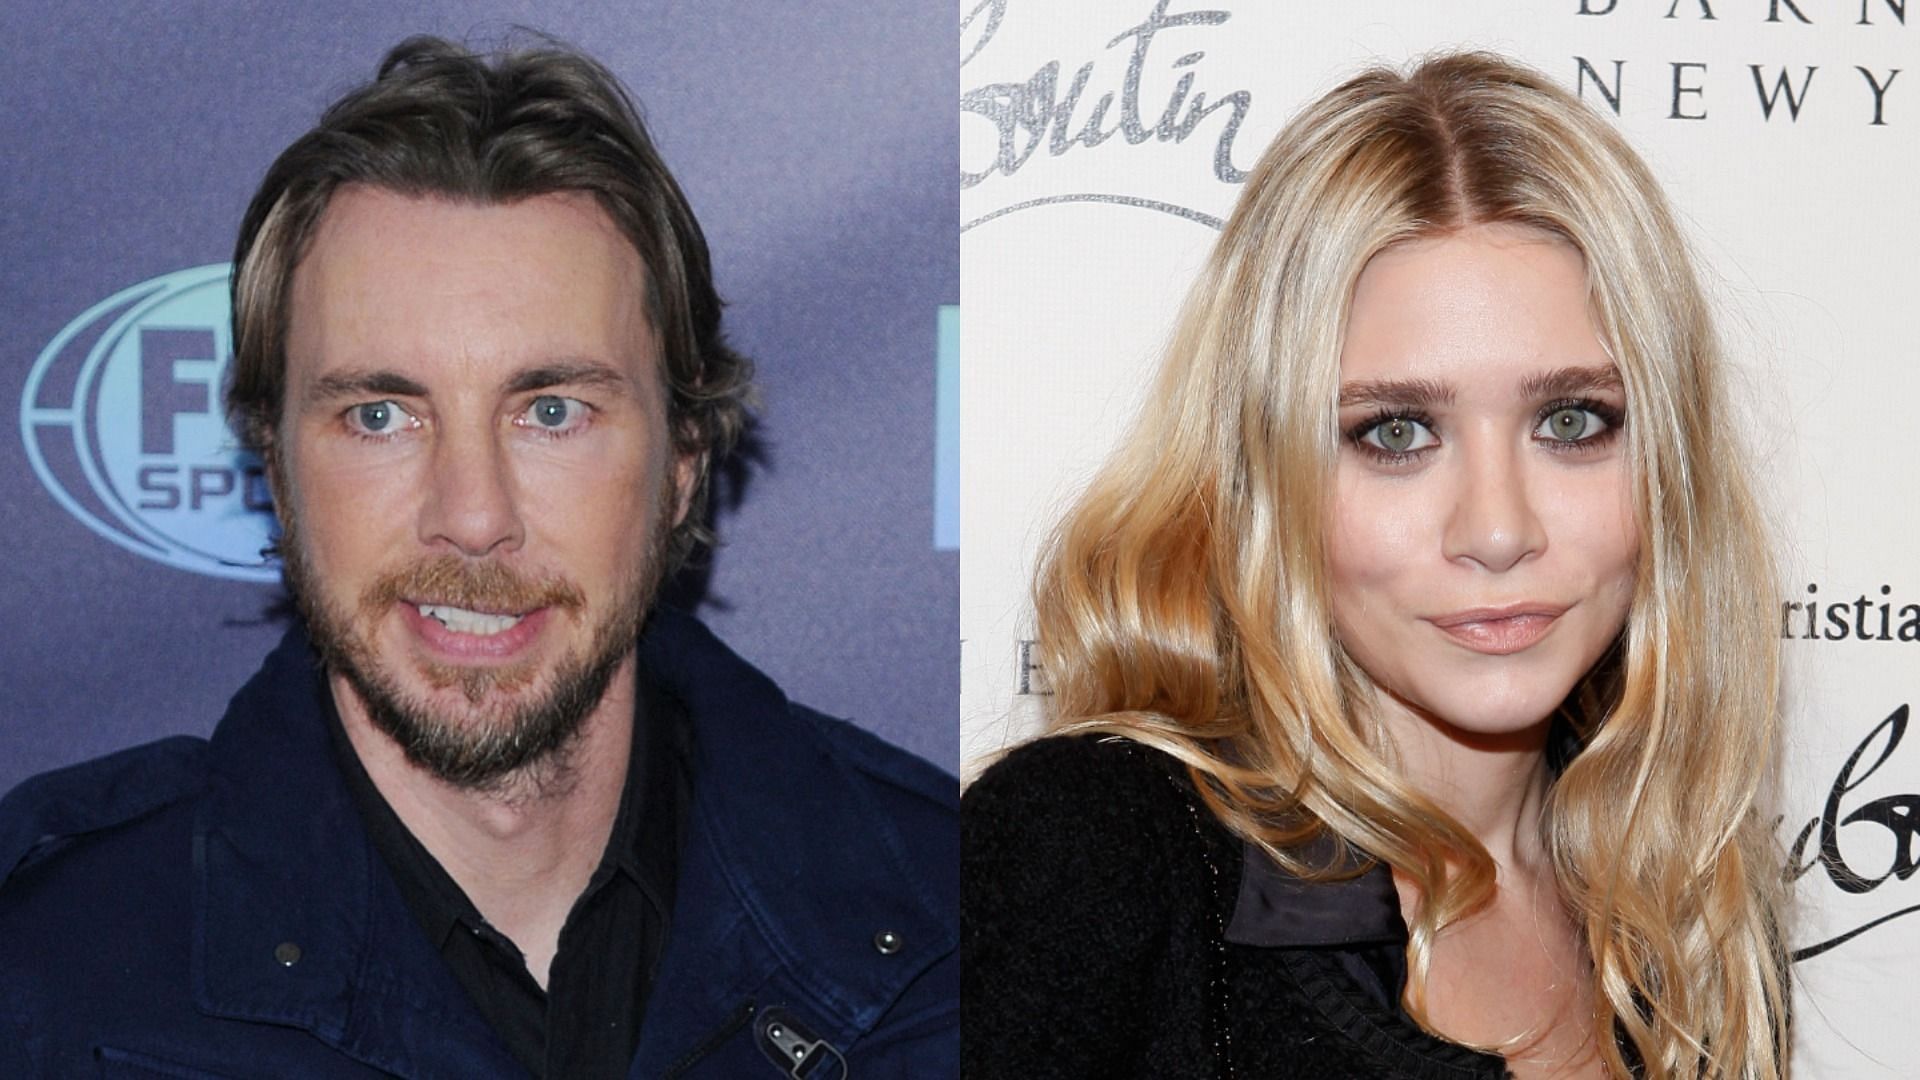 Dax Shepard met Ashley Olsen at a party (Images via MEGA and Getty Images)